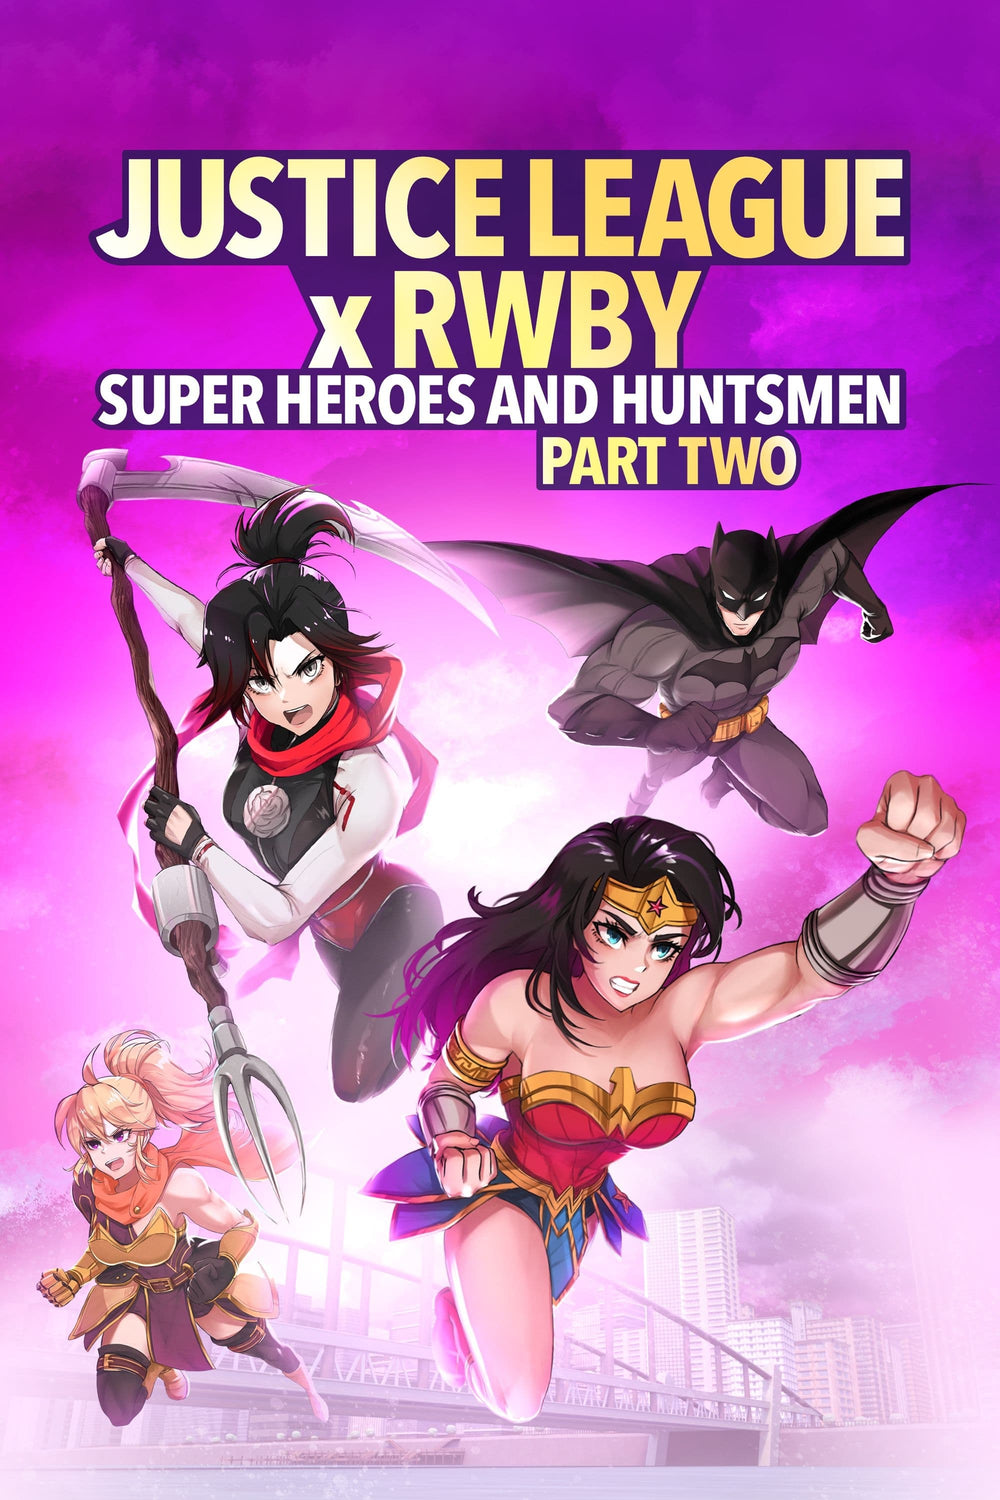 Justice League x RWBY: Super Heroes and Huntsmen, Part Two HD Moviesanywhere